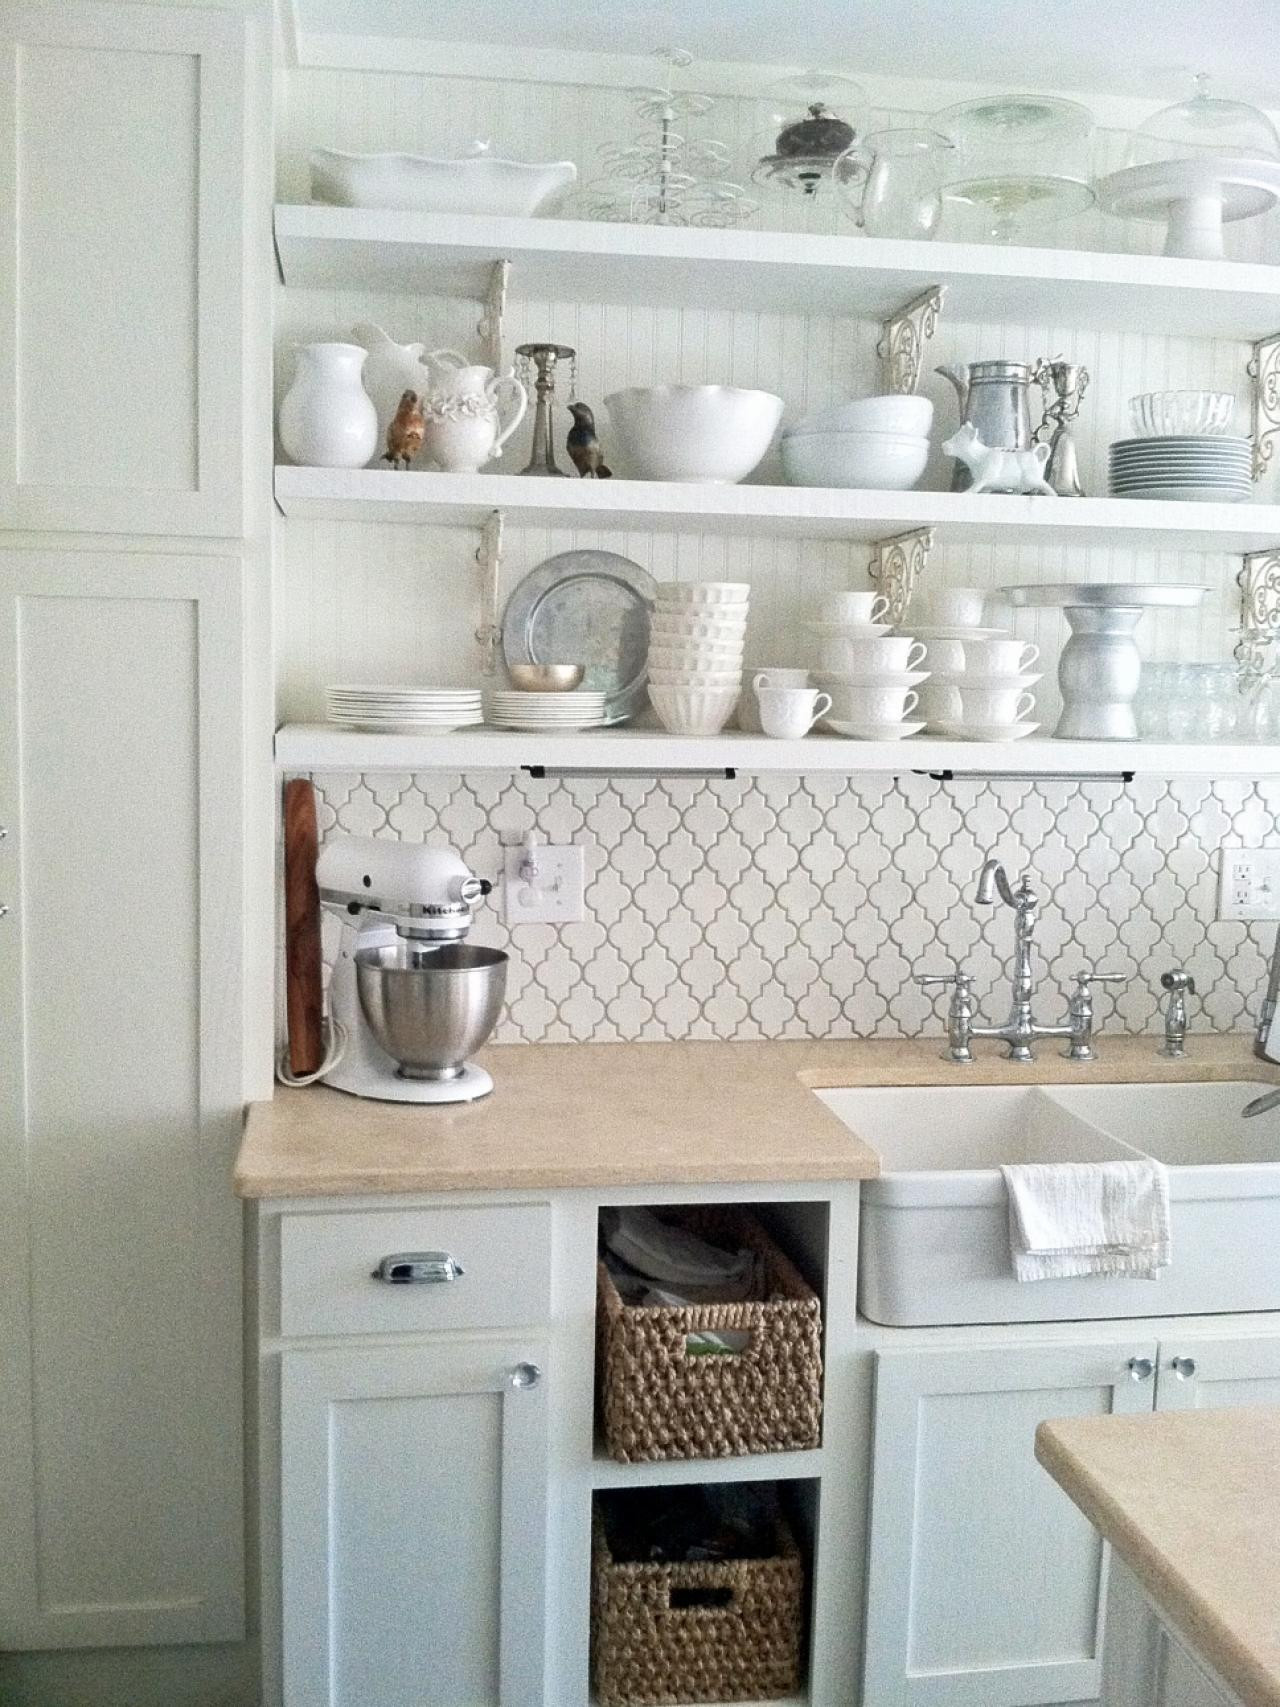 Kitchen Wall Shelves
 White Wall Shelves for Effective Storage in Small Kitchen